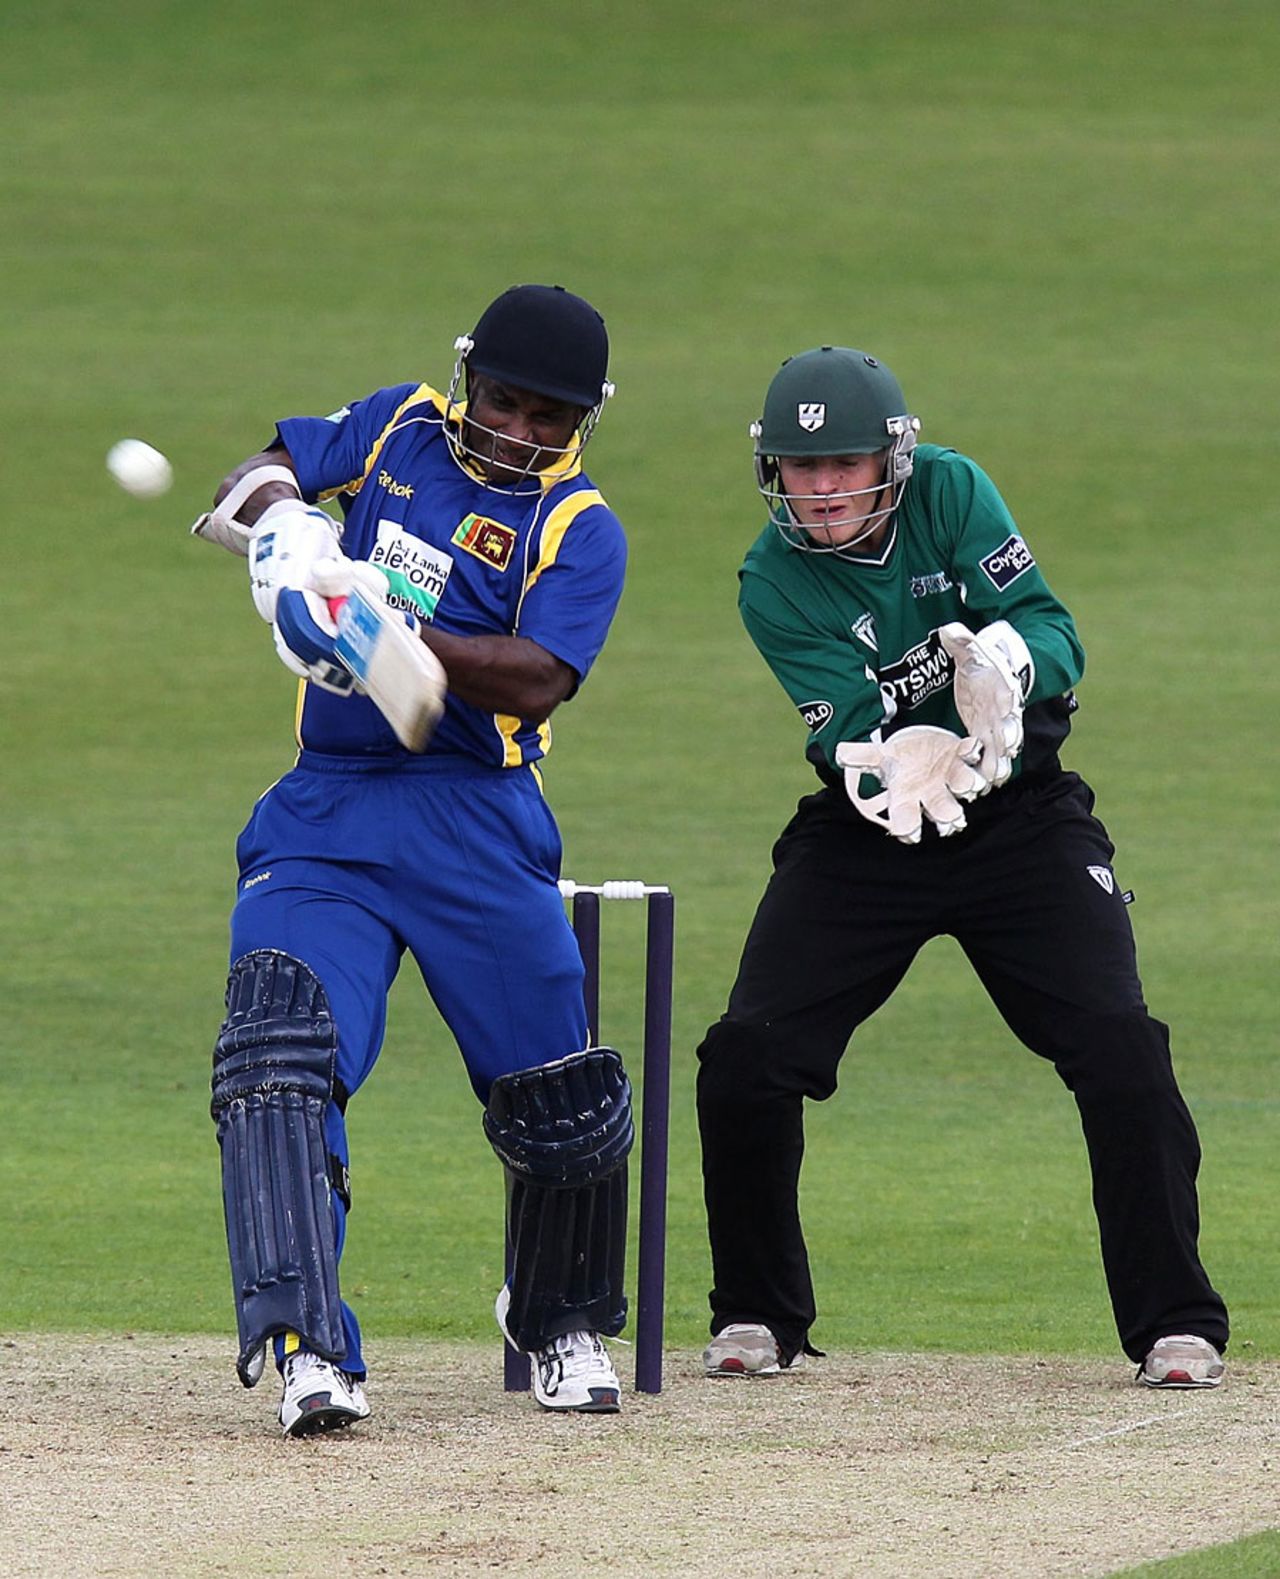 Sanath Jayasuriya struck 10 fours and three sixes in his 60-ball stay, Worcestershire v Sri Lankans, Tour Match, New Road, June 22 2011